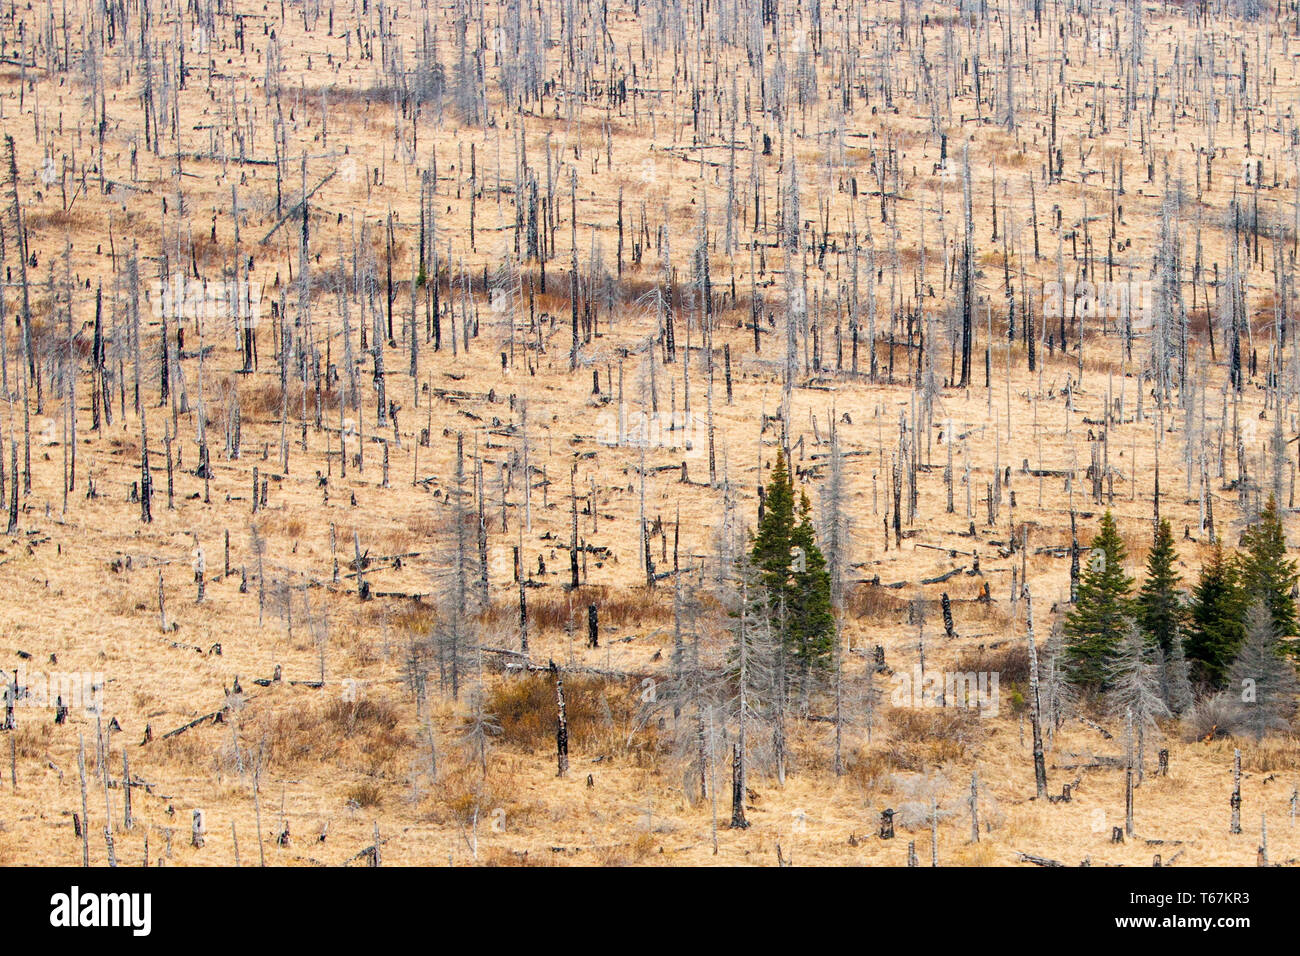 A patch of damaged forest near Anchorage in Alaska. The borealis forest – typically pine, birch and larch - make up about thirty percent of all forest in the world. Less efficient than rain forests, it’s still a vital part of the carbon sink. The mean temperature in the arctic areas are already 1.5c warmer than normal. Higher levels of CO2 accelerate growth of the forest, and has been lauded by climate deniers as proof that global warming is a hoax. However; as growth is accellerated, the lifespan of the trees is shortened. The net result is a CO2 saturated forest that turn from being a carbon Stock Photo